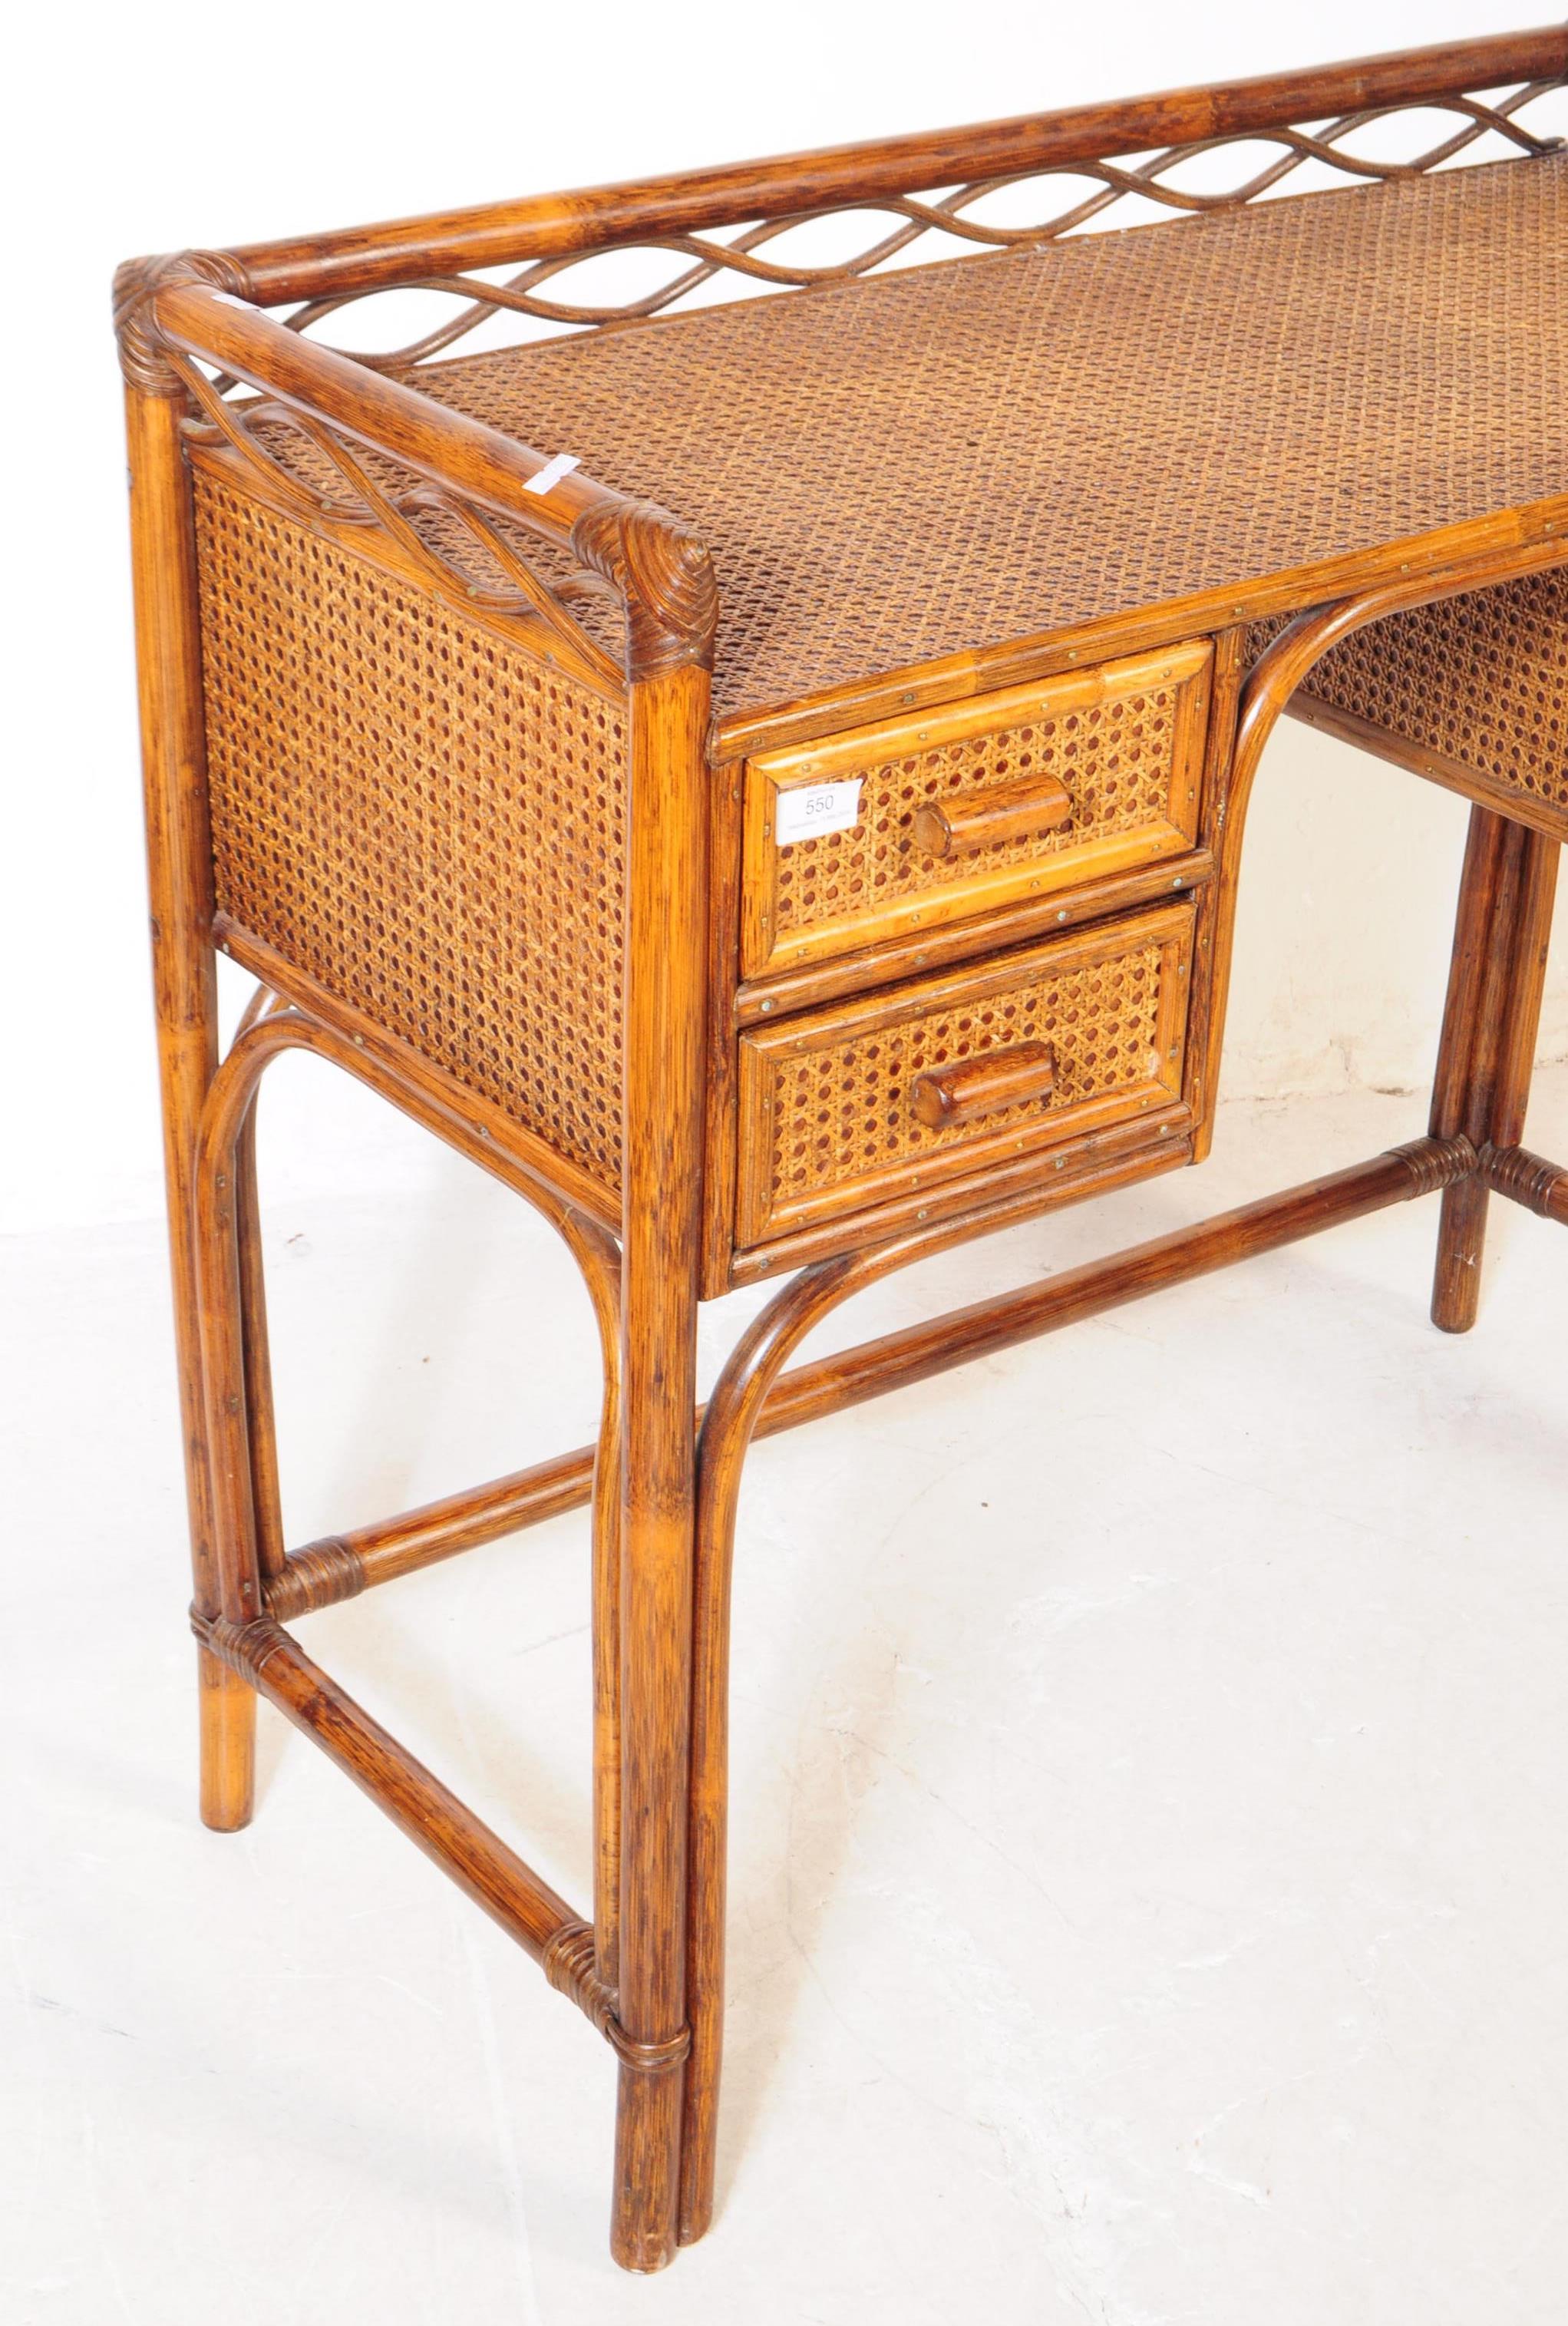 ANGRAVES OF LEICESTER - RETRO MID 20TH CENTURY RATTAN DESK - Image 3 of 6